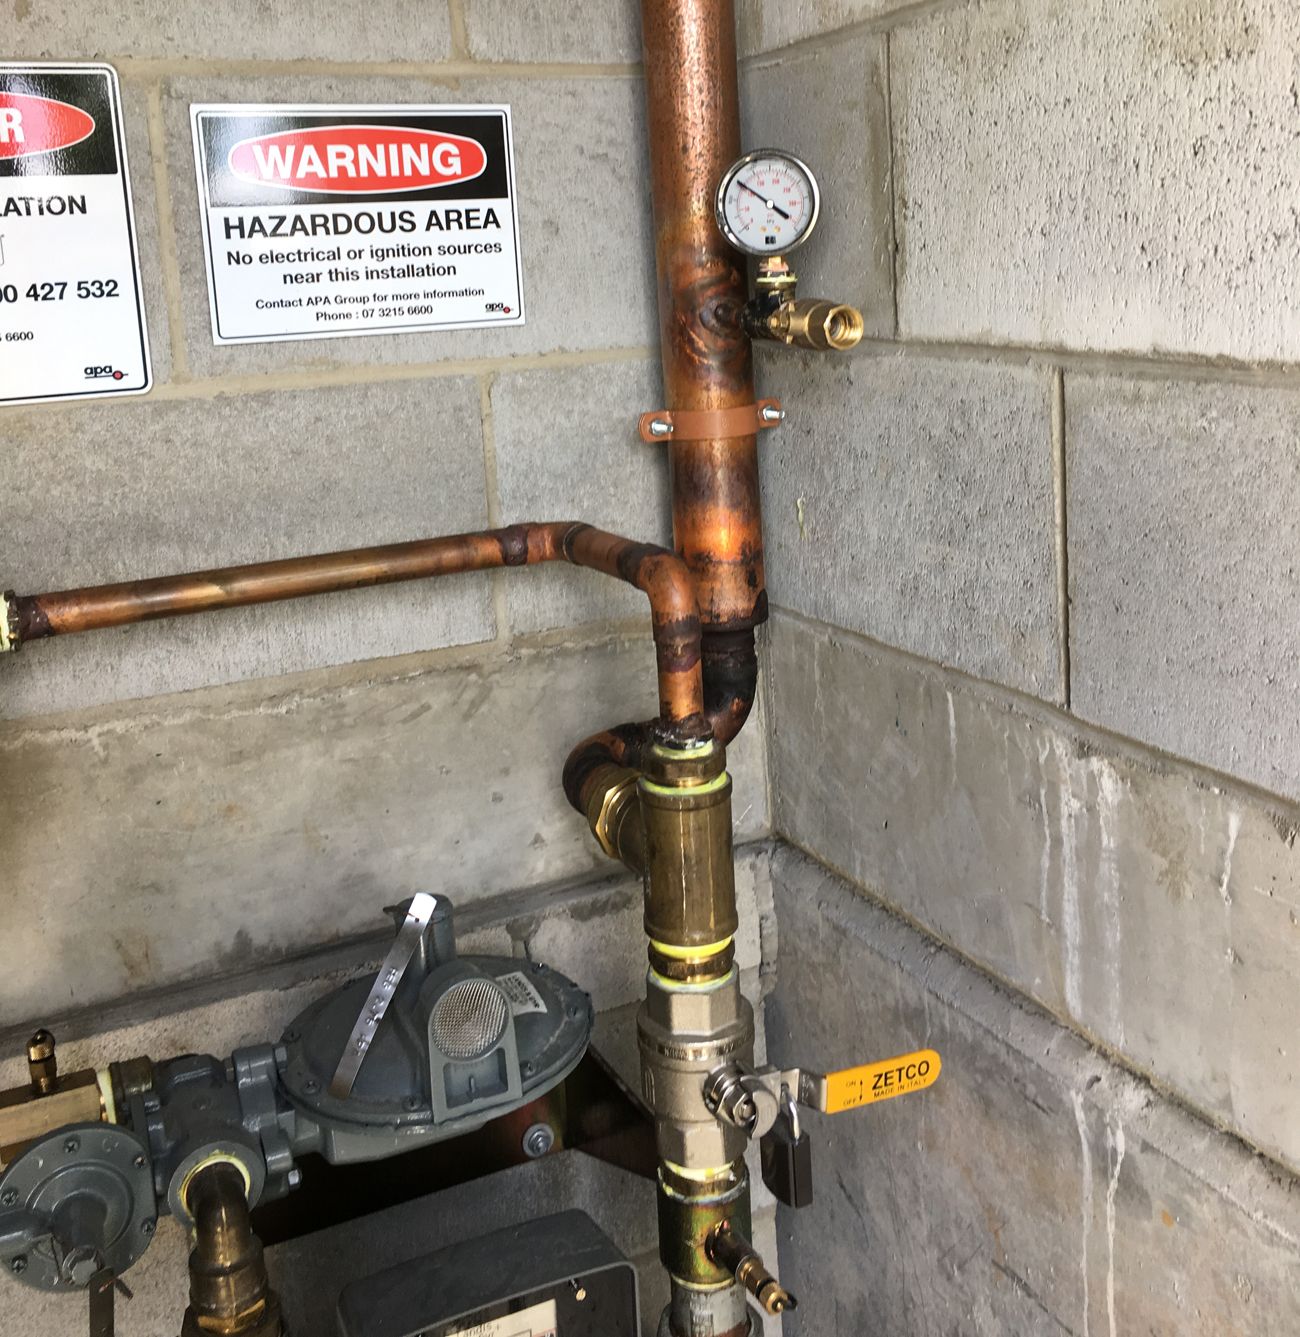 Connection Inspection And Service Of All Gas Services